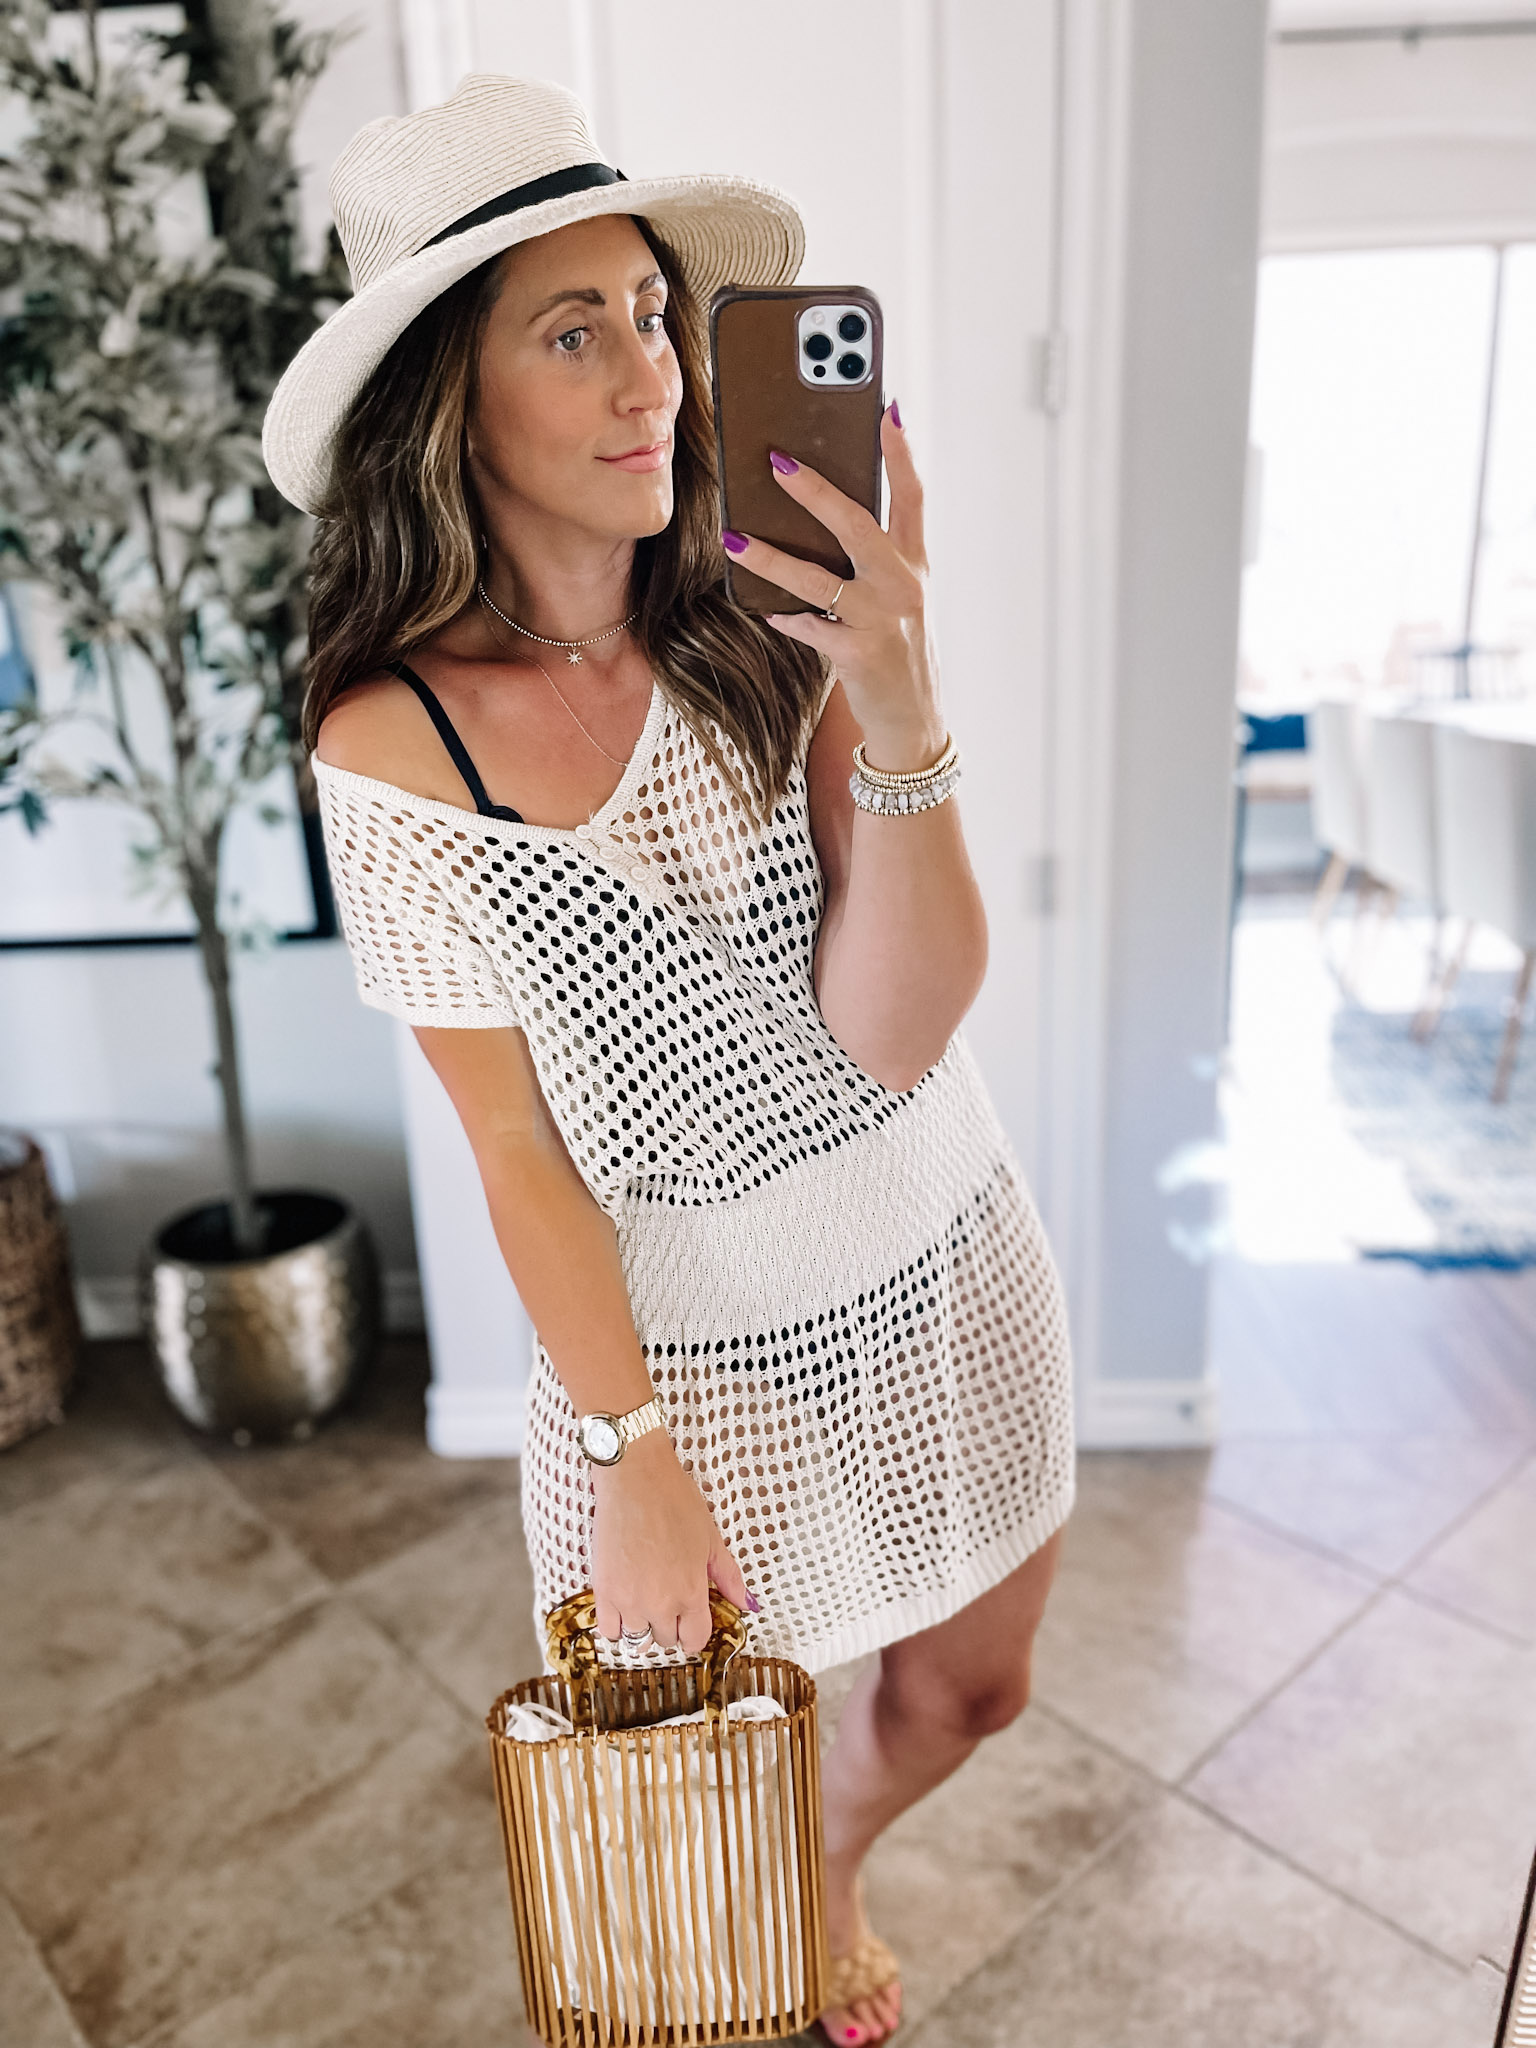 crochet cover-up - Amazon Haul - Spring Break finds - This is our Bliss - #amazonswim #amazonfashion #amazoncoverup